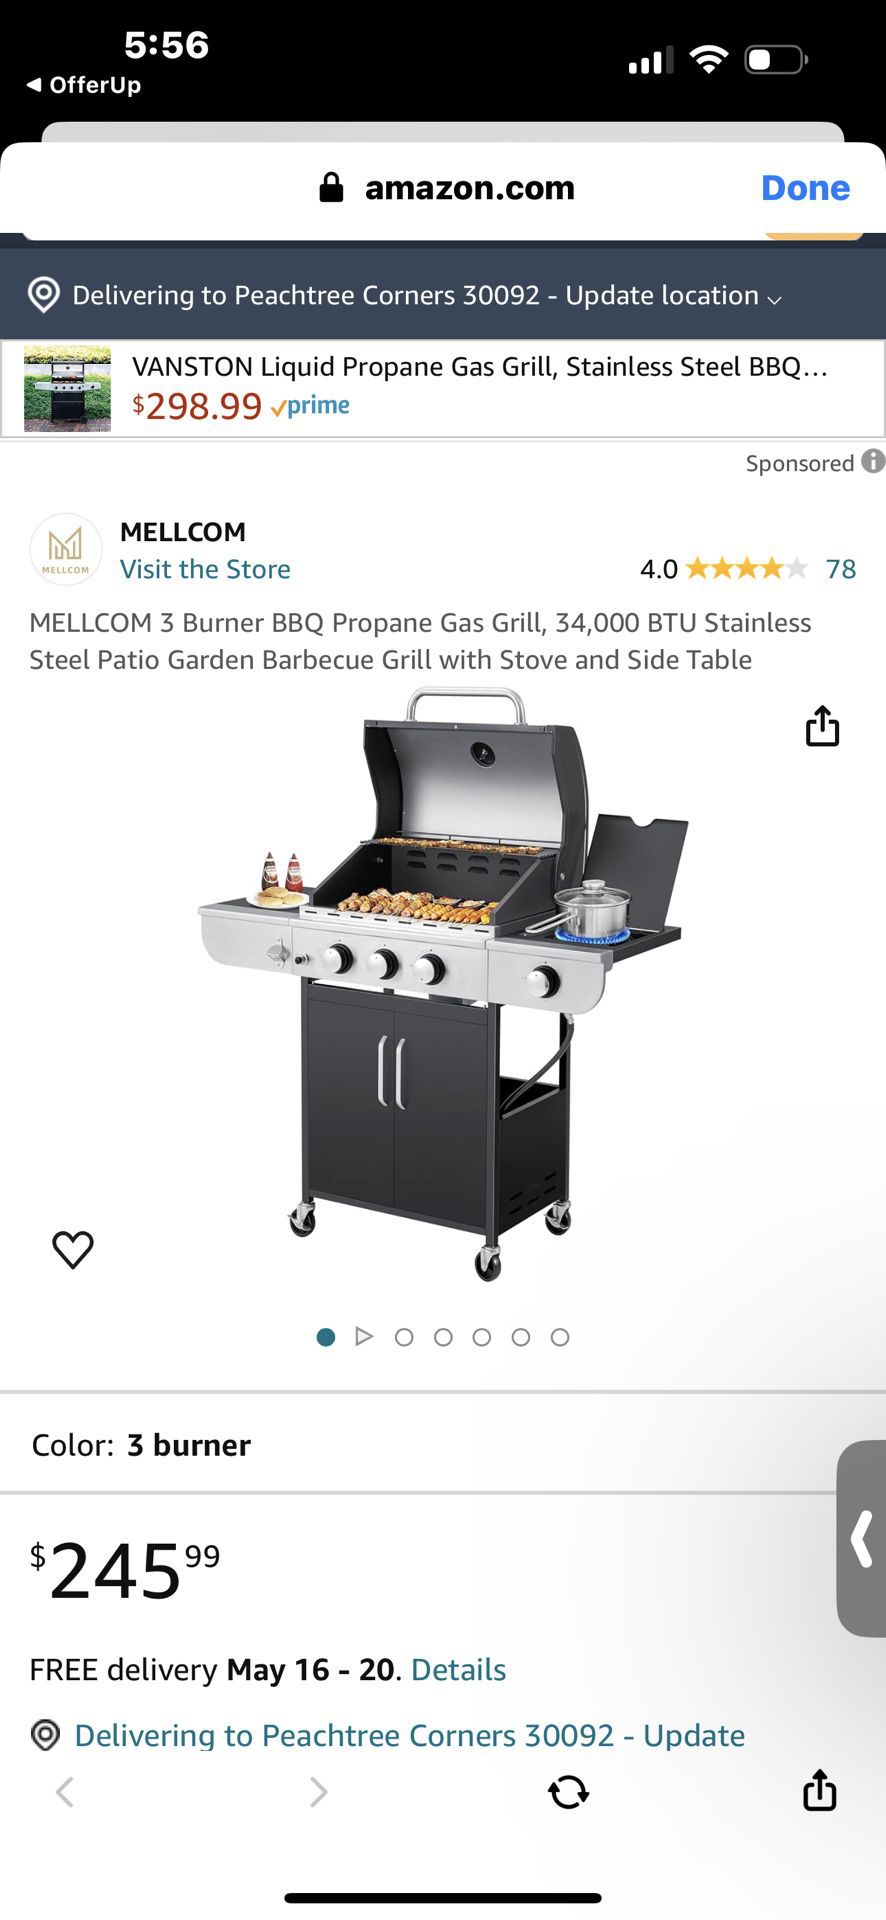 3 Burner BBQ Propane Gas Grill, 34,000 BTU Stainless Steel Patio Garden Barbecue Grill with Stove and Side Table